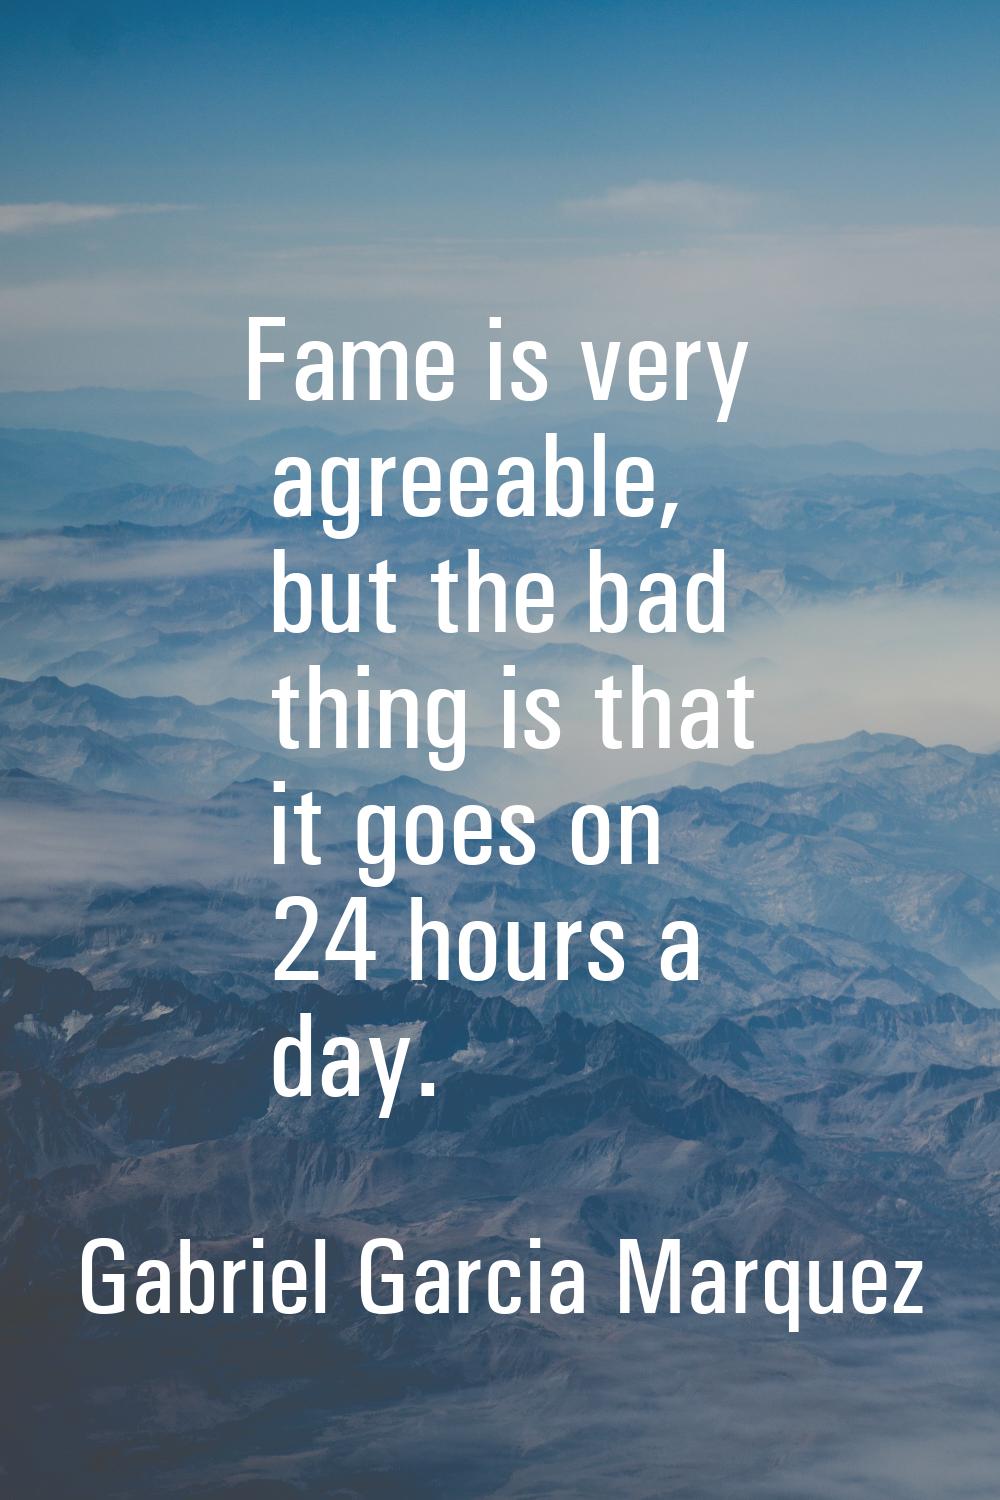 Fame is very agreeable, but the bad thing is that it goes on 24 hours a day.